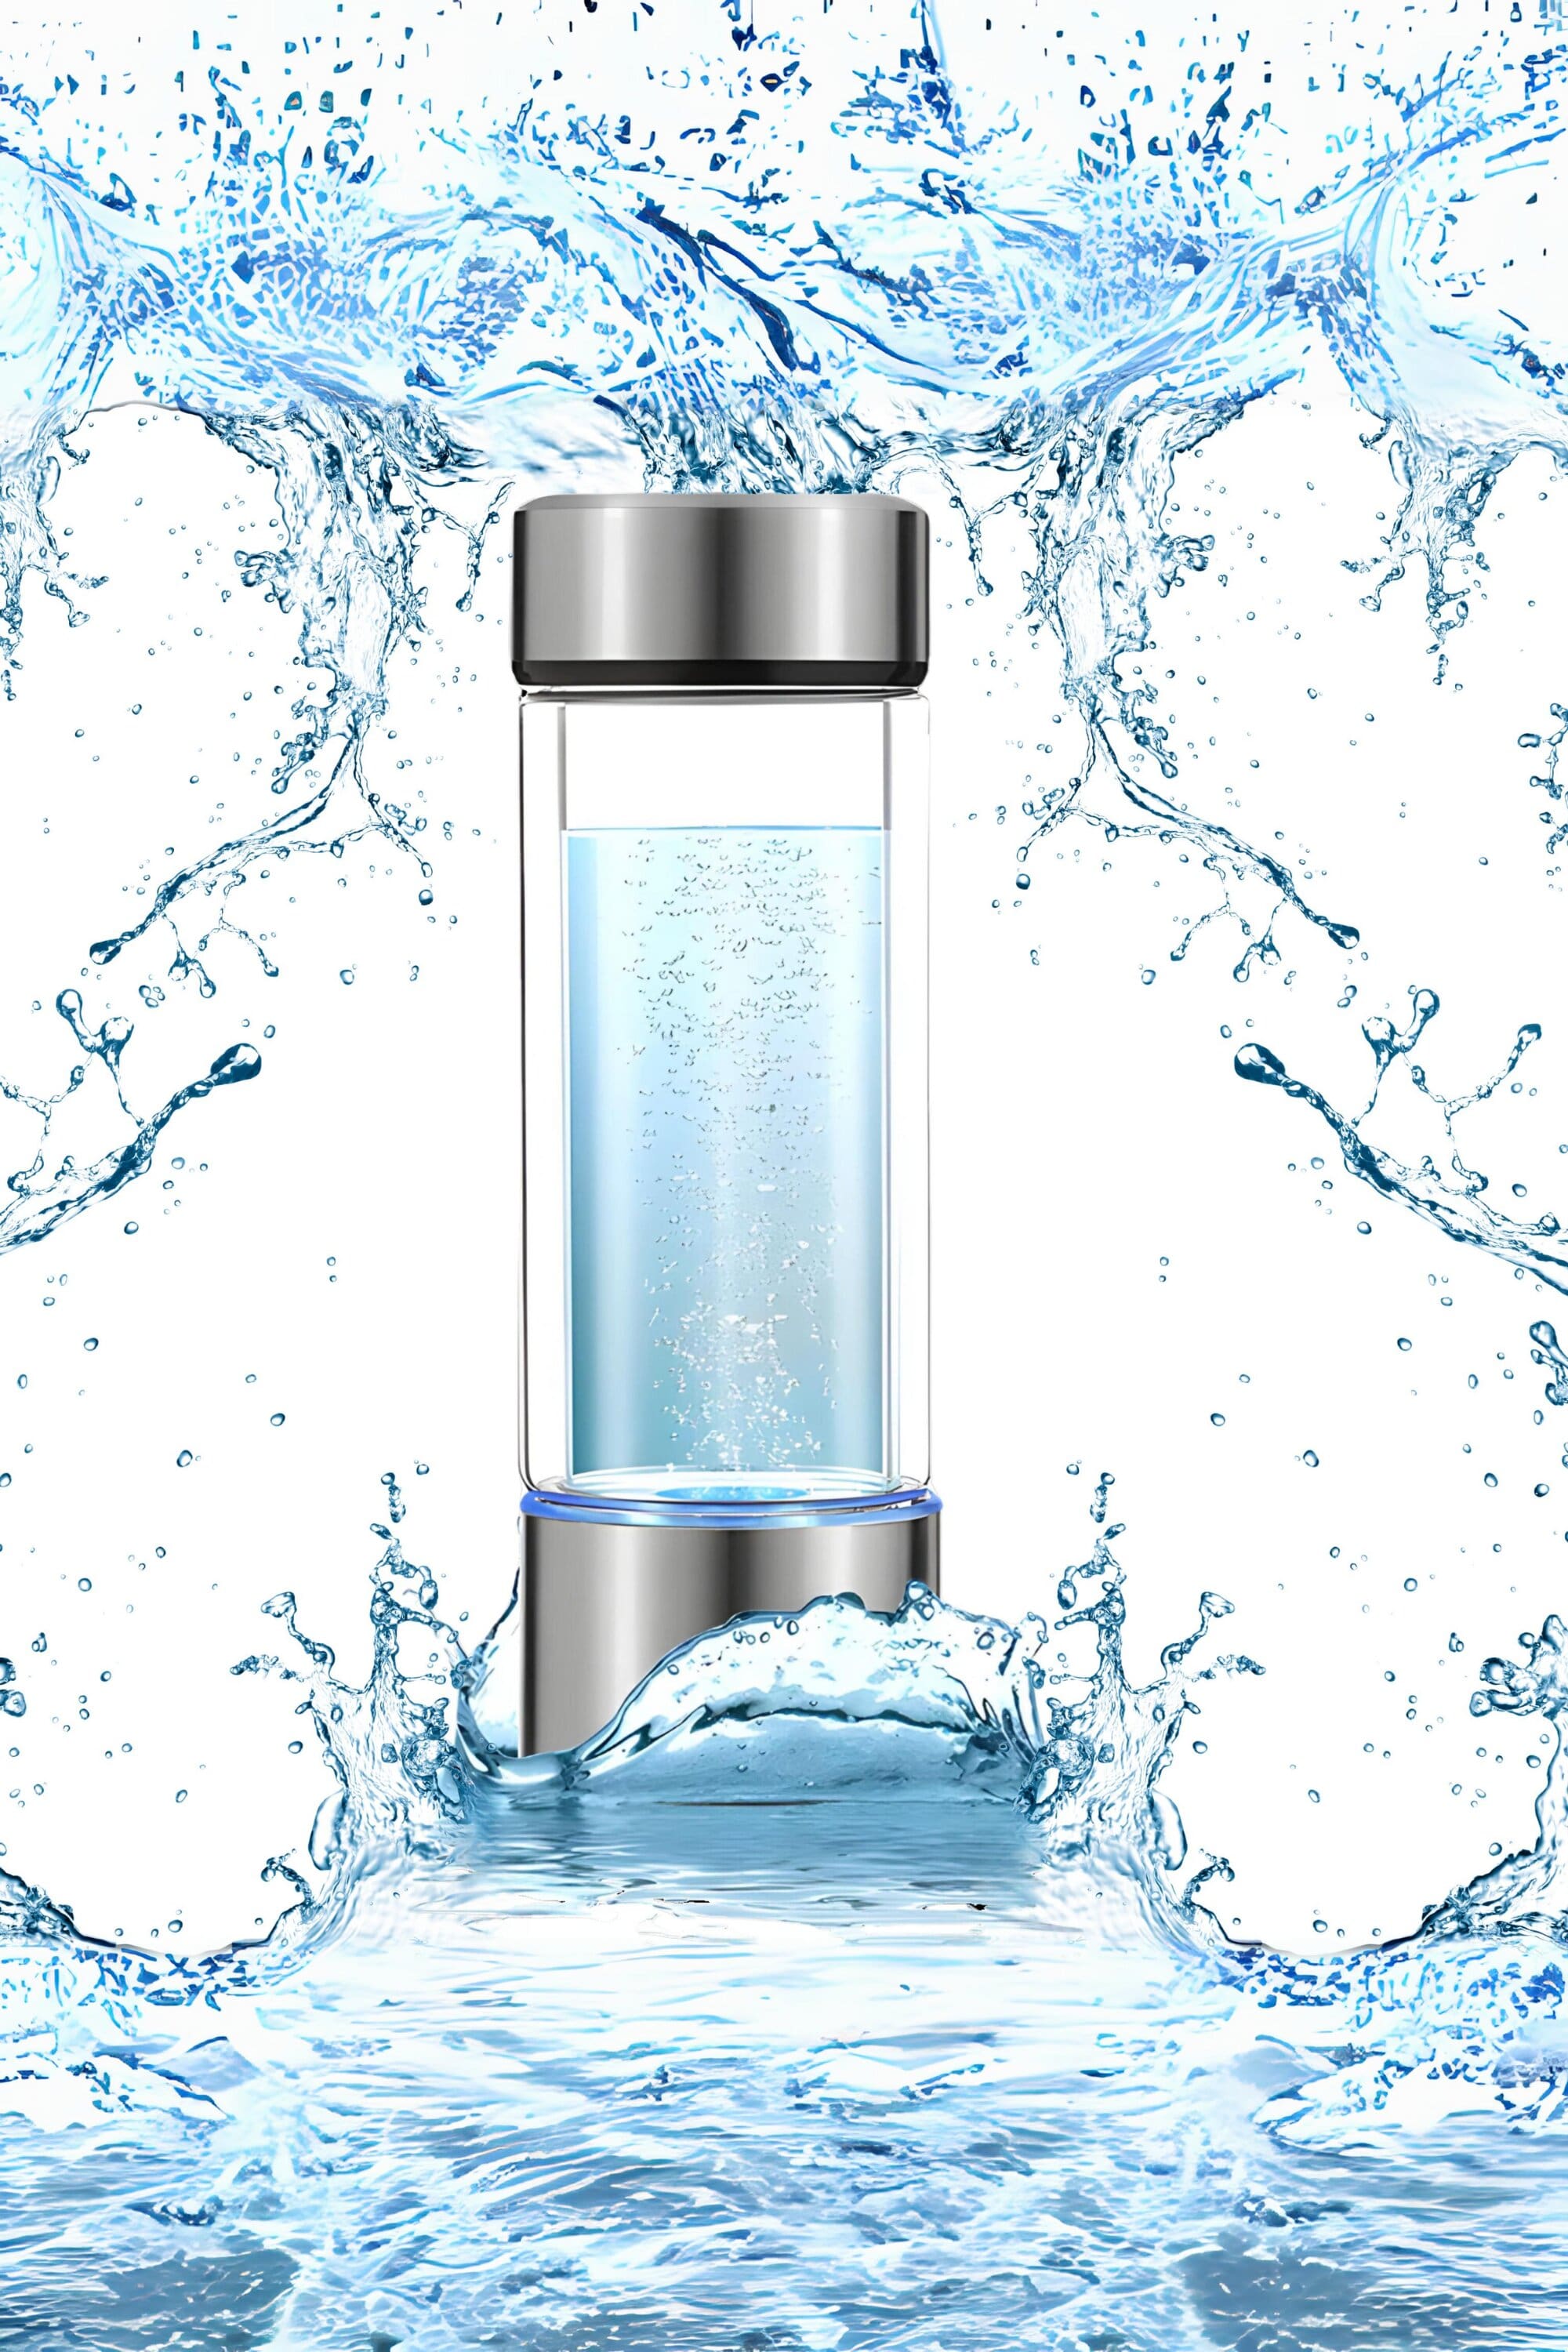 Hydrogen water generator bottle with bubbling water surrounded by dynamic splashes, highlighting the benefits of hydrogen-rich drinking water.